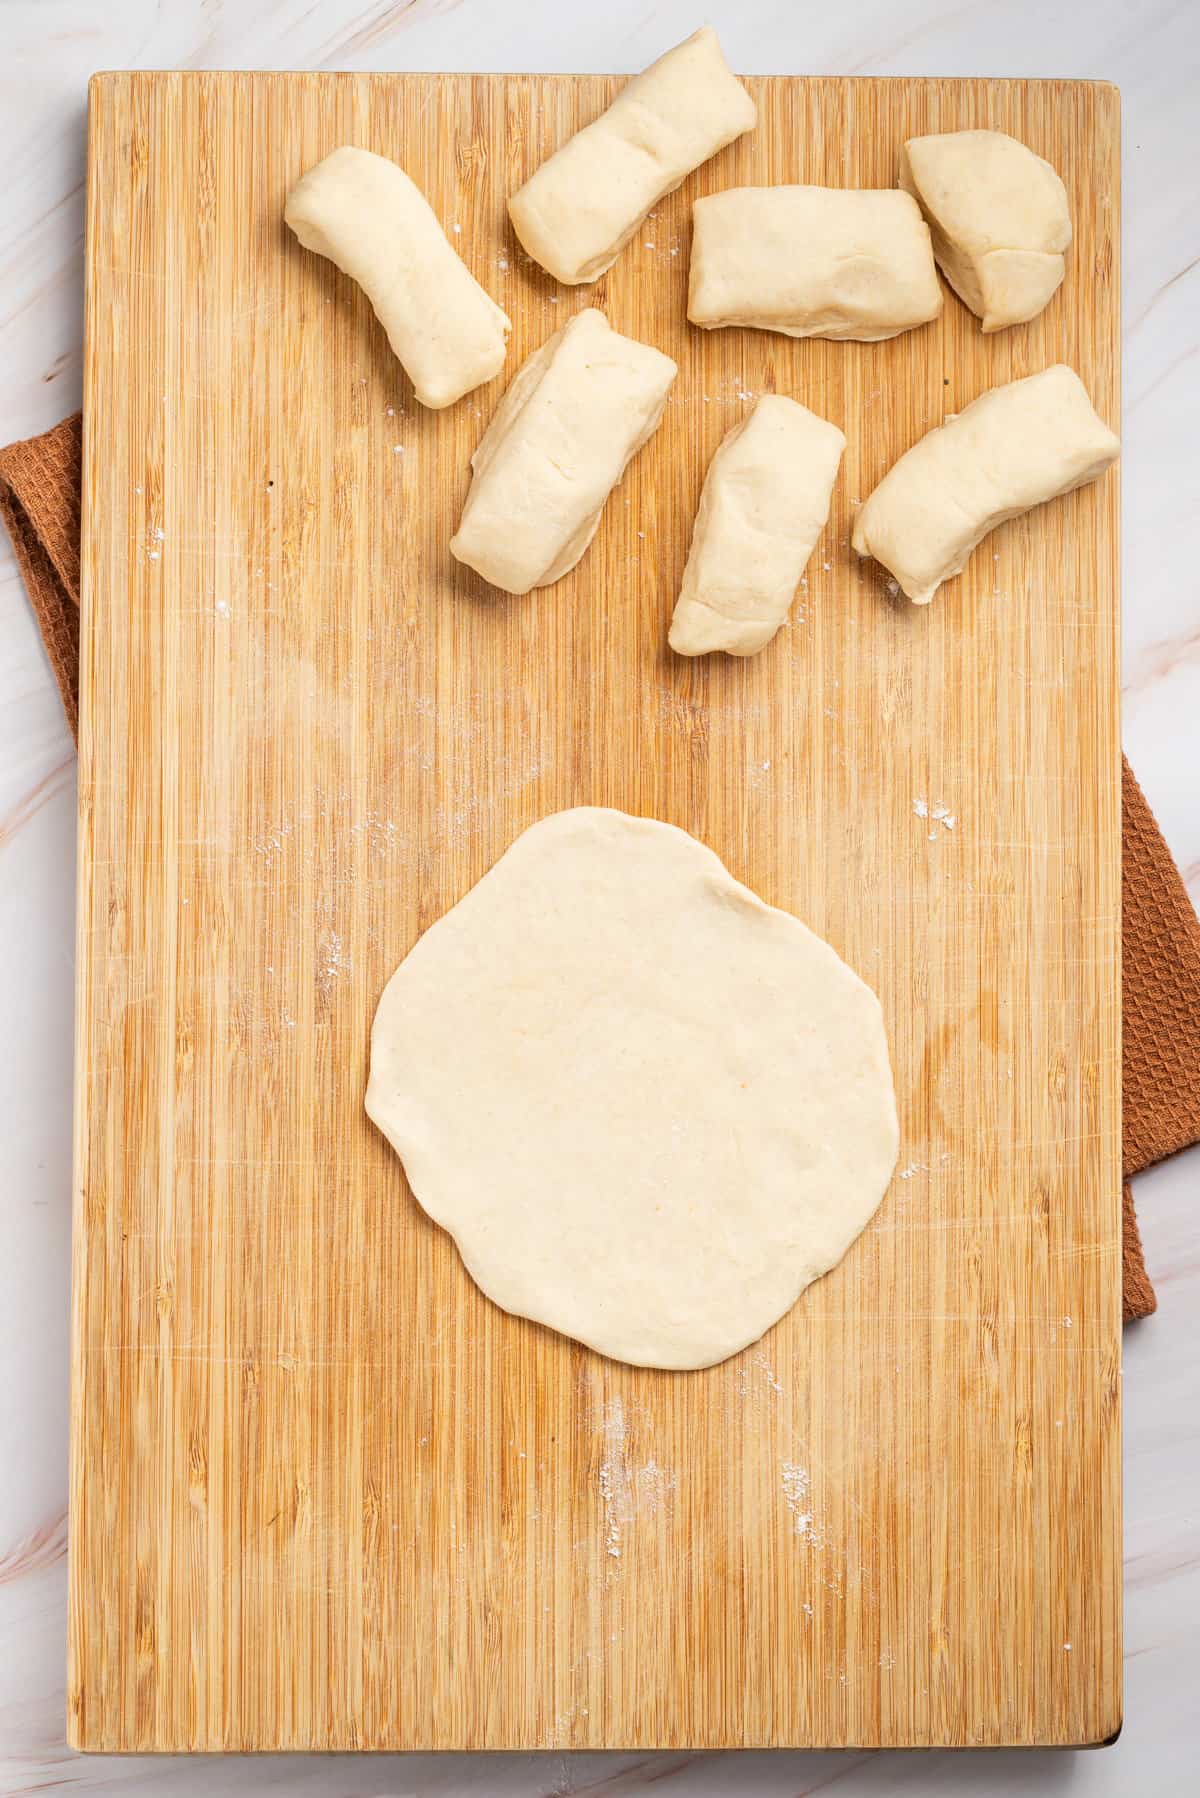 An image of samosa dough being flattened on a board.